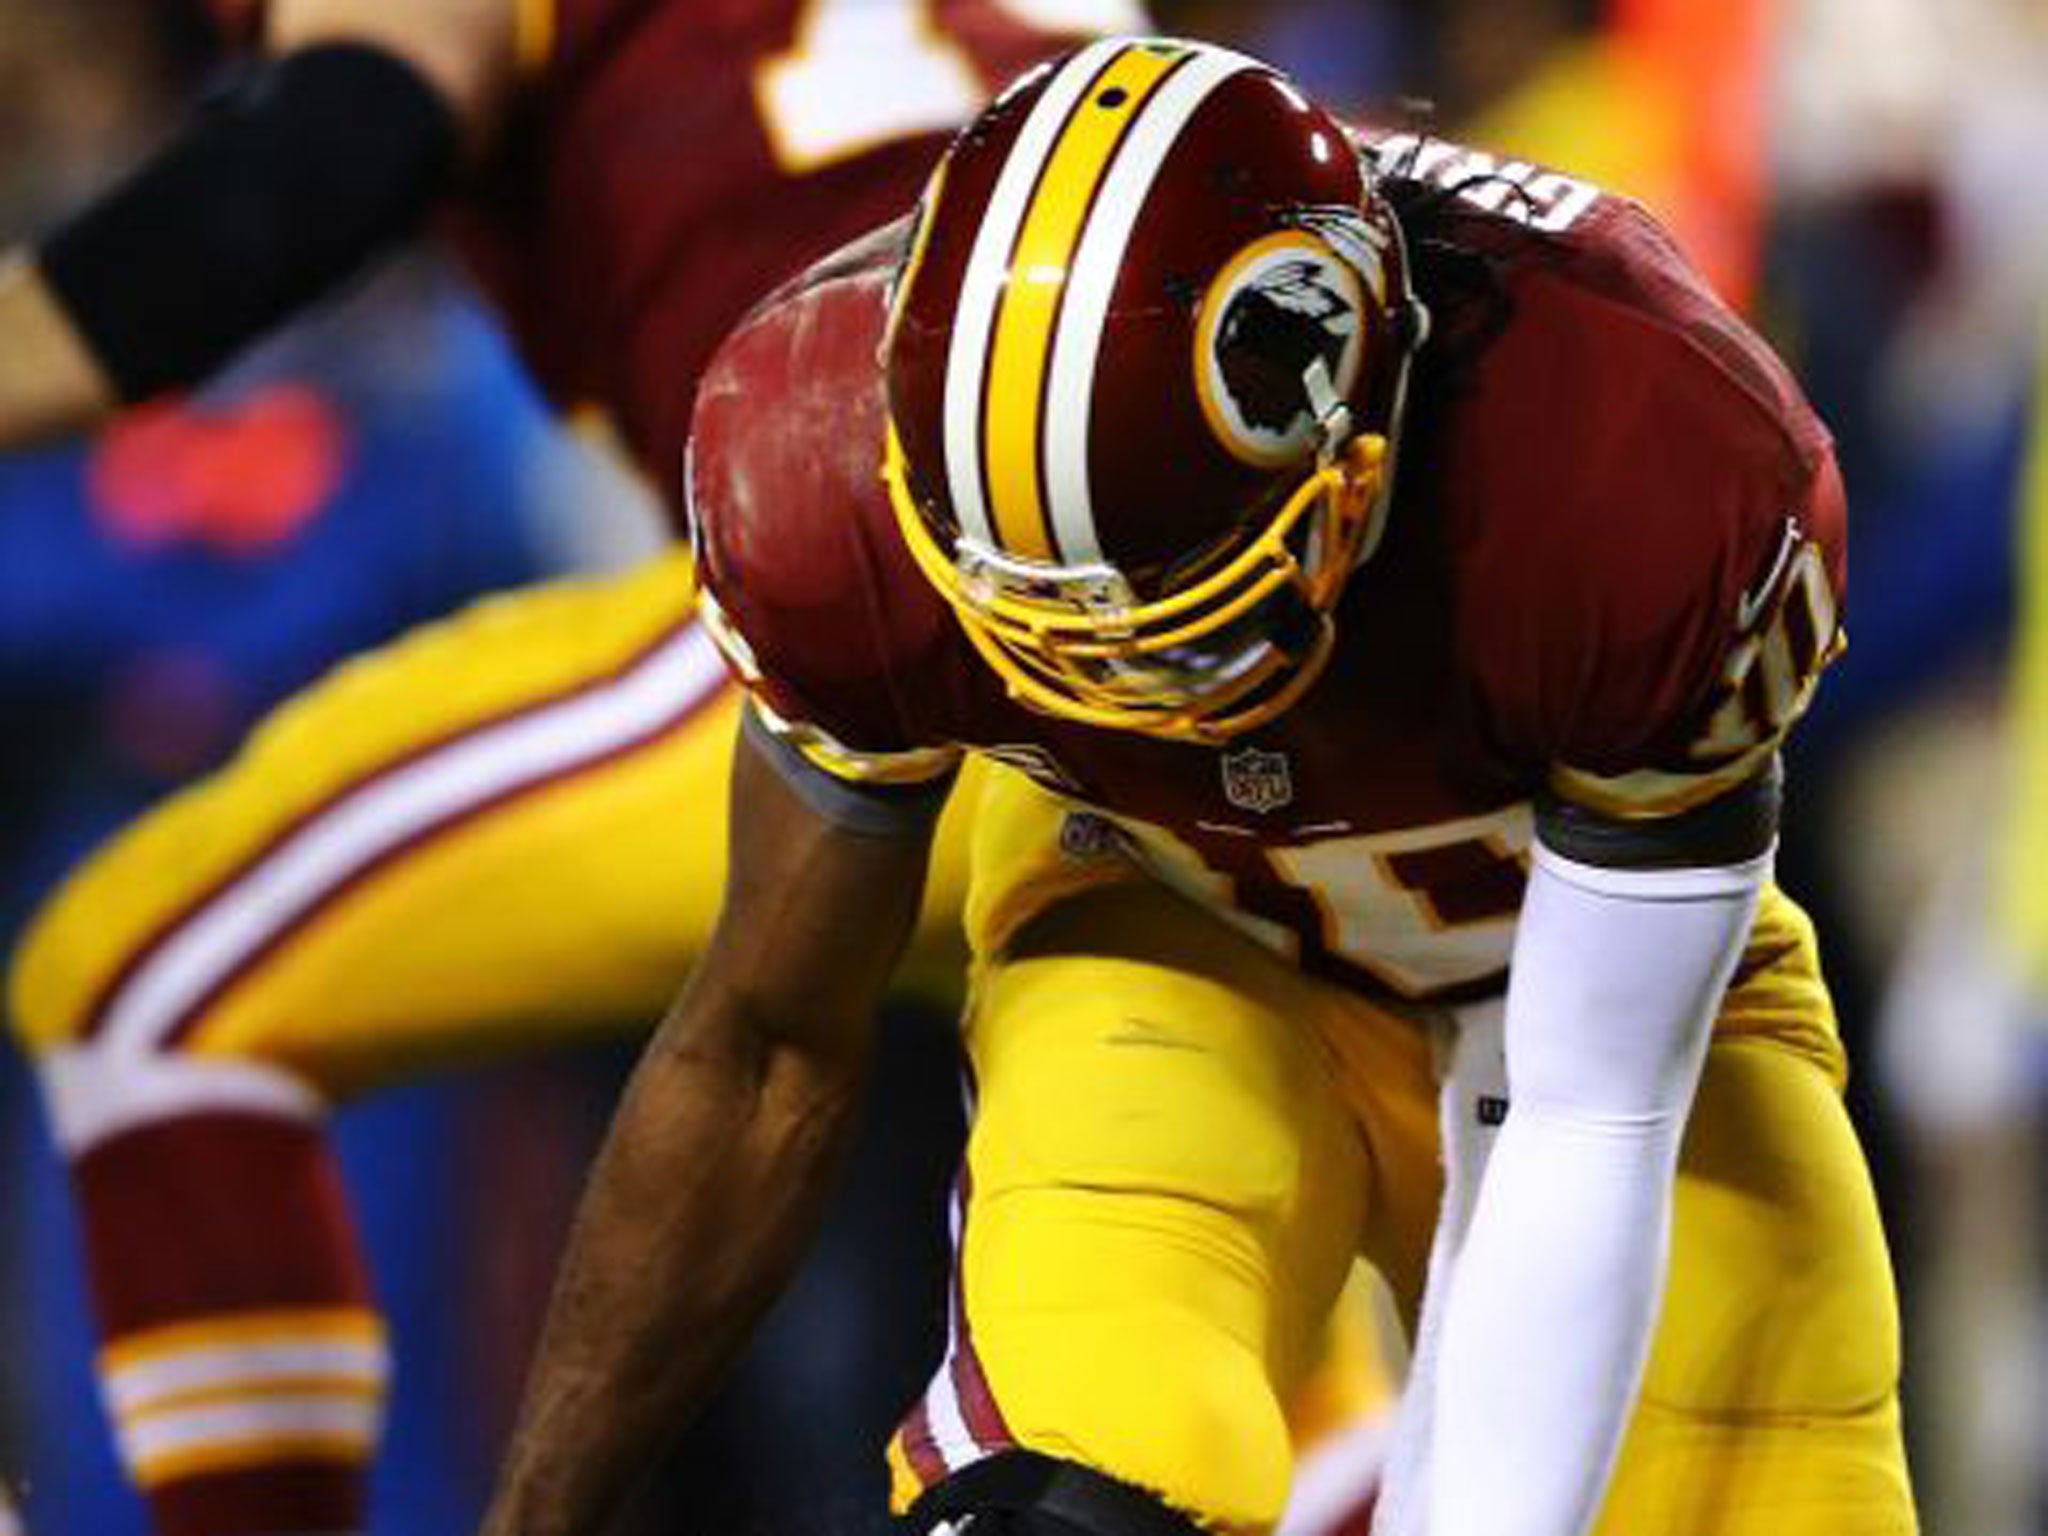 Robert Griffin III played on last week with a serious knee injury